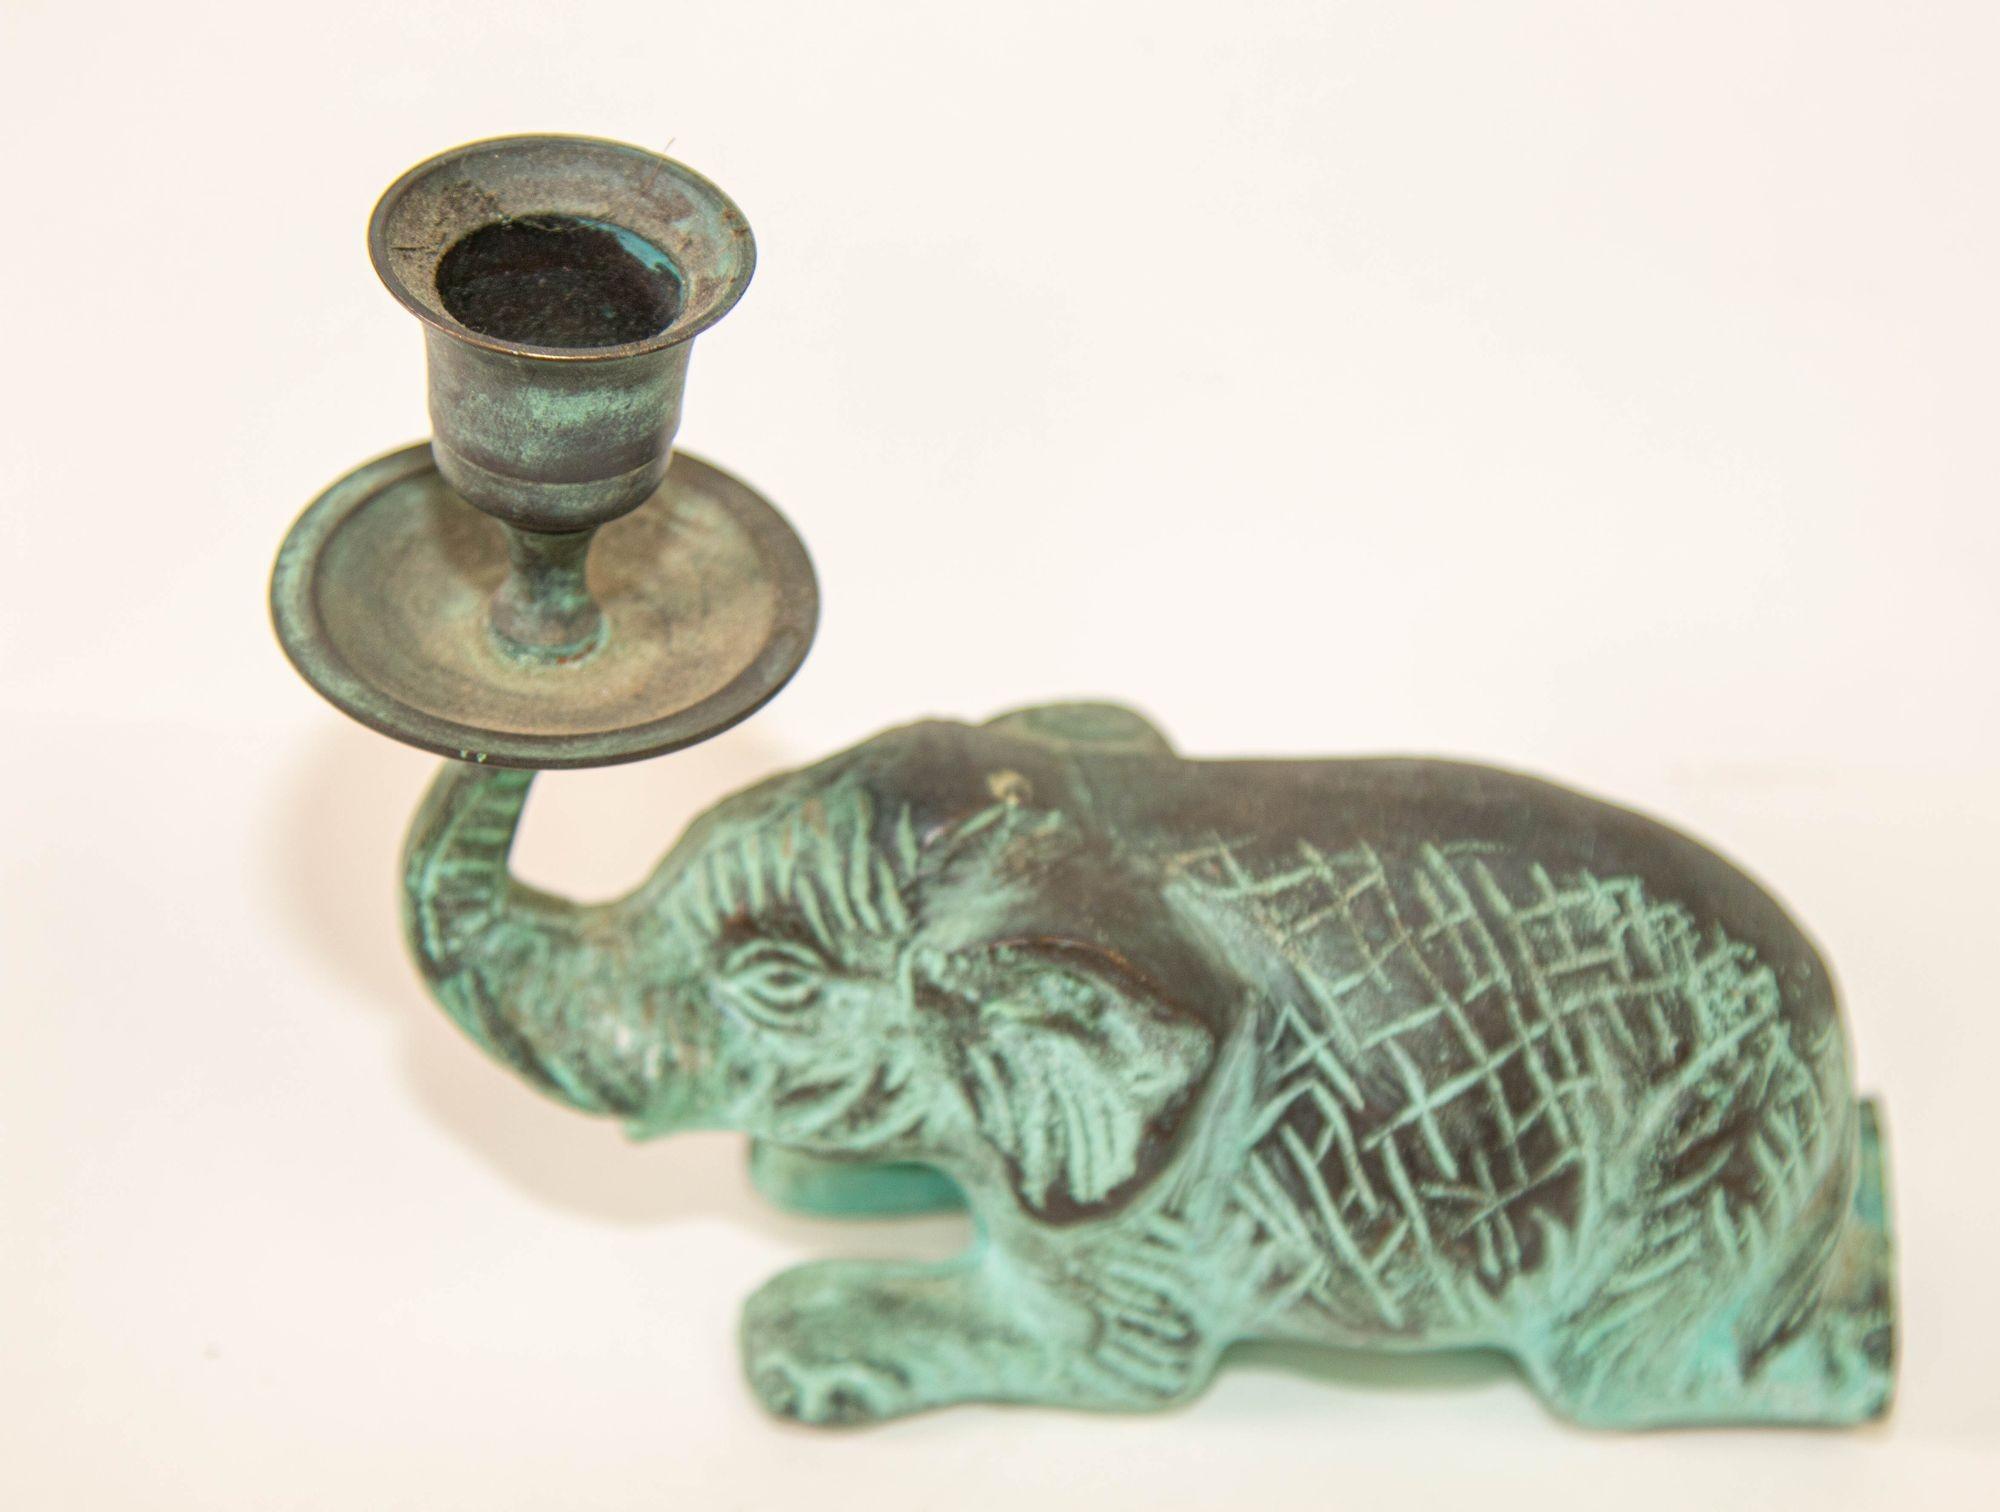 Vintage bronze elephant candle hders with trunk up, good fortune heavy metal with green patina.Vintage Bronze Patinated Green Metal Elephant Candle Hder Fortune Trunk Up .The elephant candlestick hder with lucky raised trunk.Rajasthani elephant